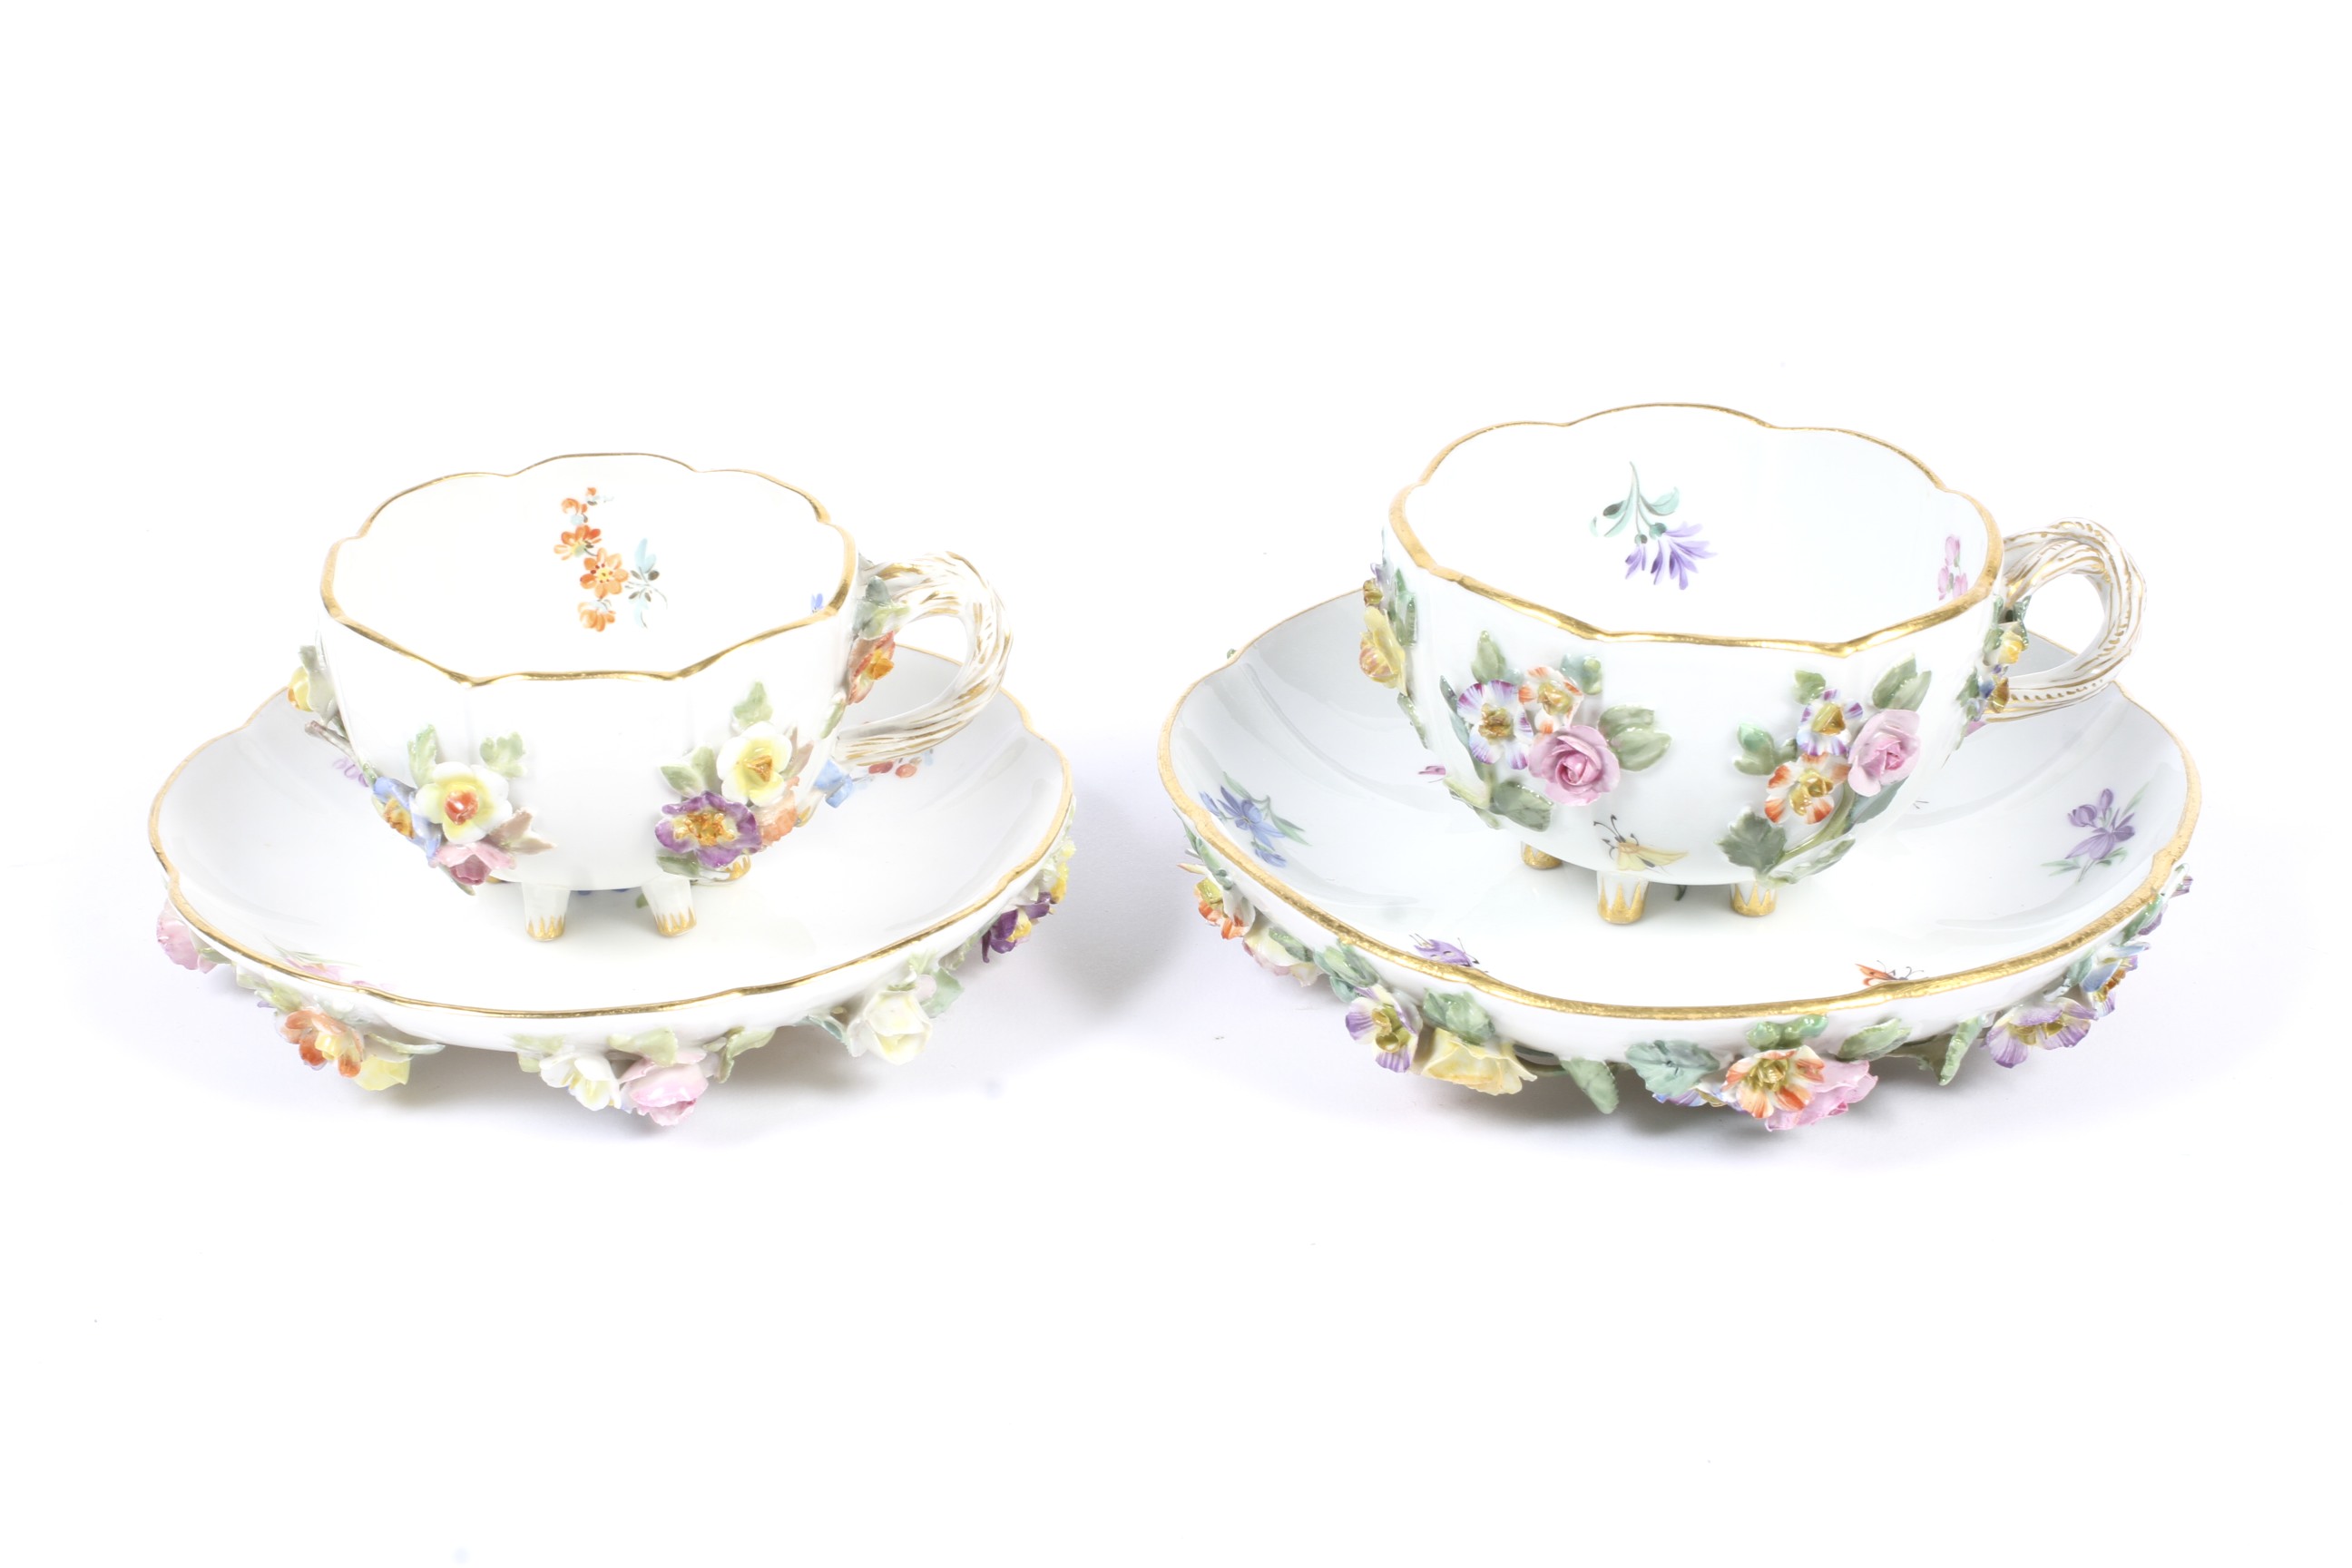 Two late 19th century Meissen flower encrusted teacups and saucers.